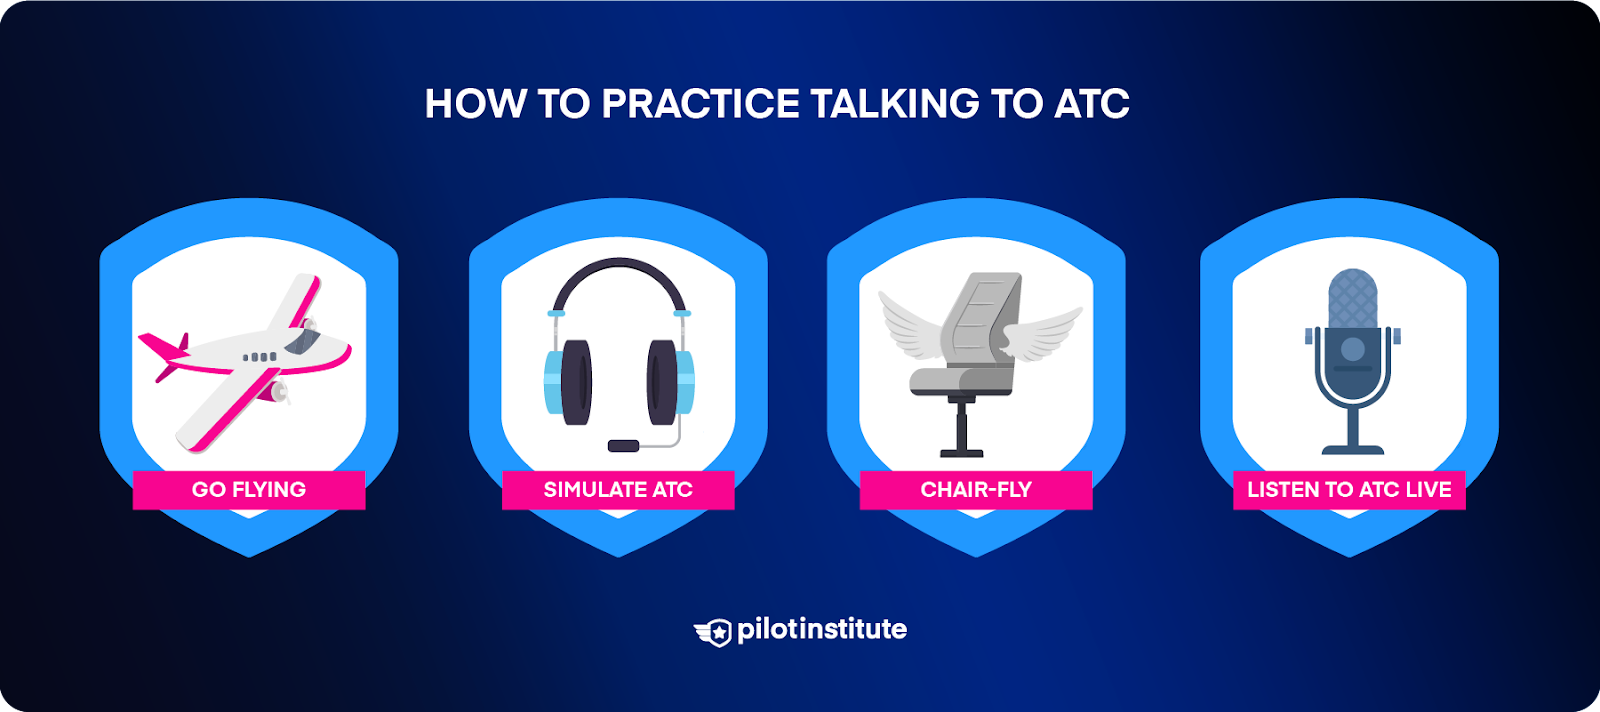 Infographic outlining four ways to practice talking to ATC.